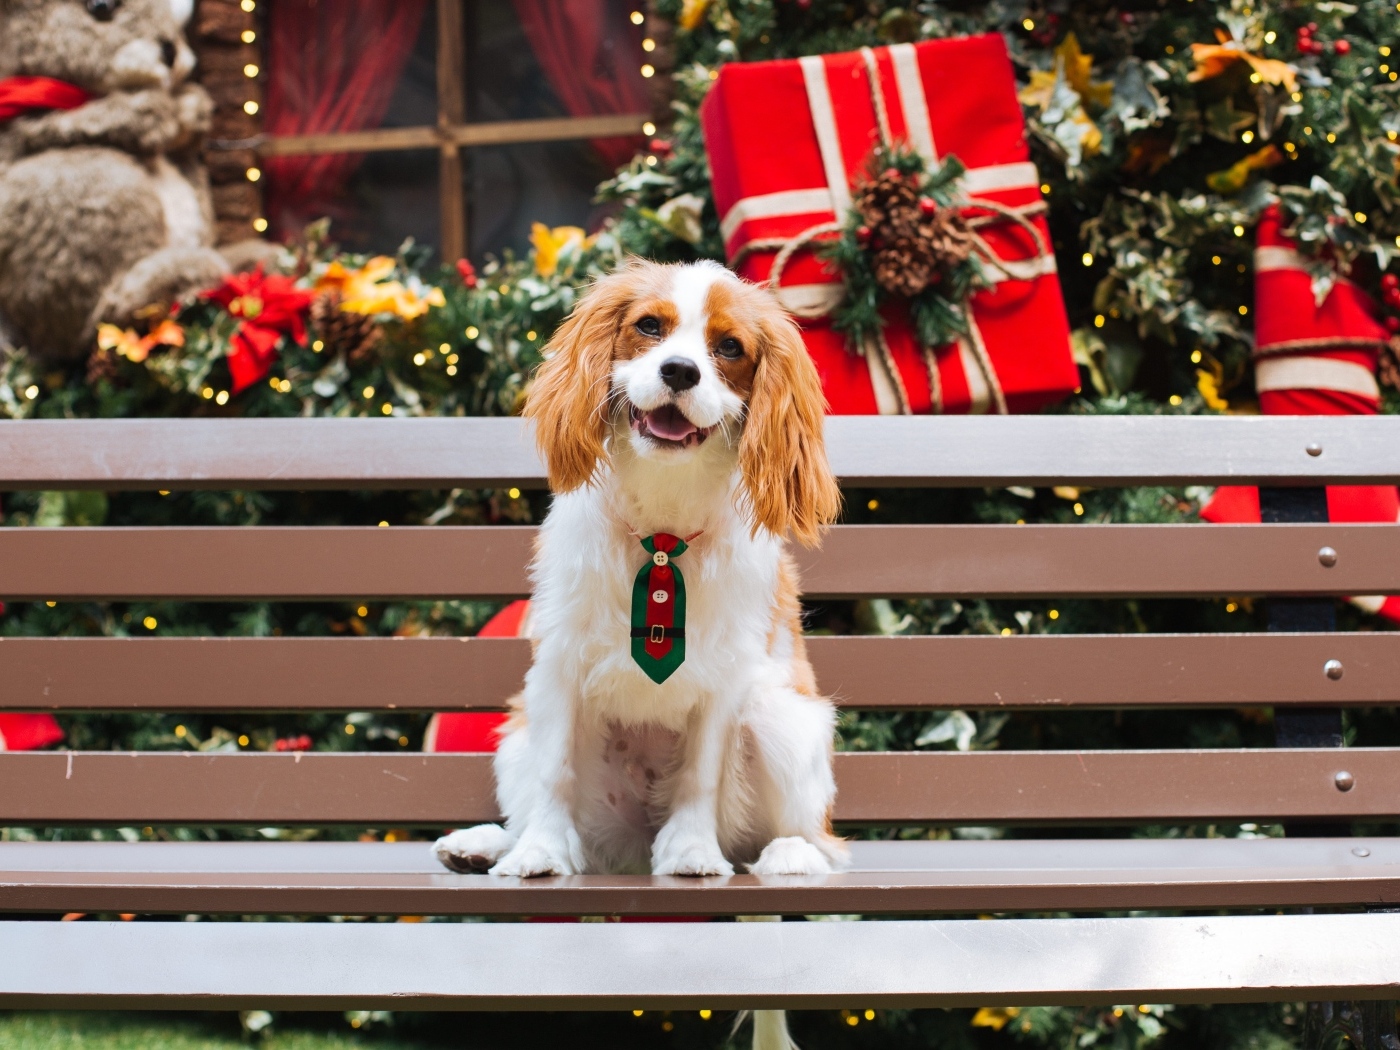 Smiling Charles King Spaniel sitting on a bench